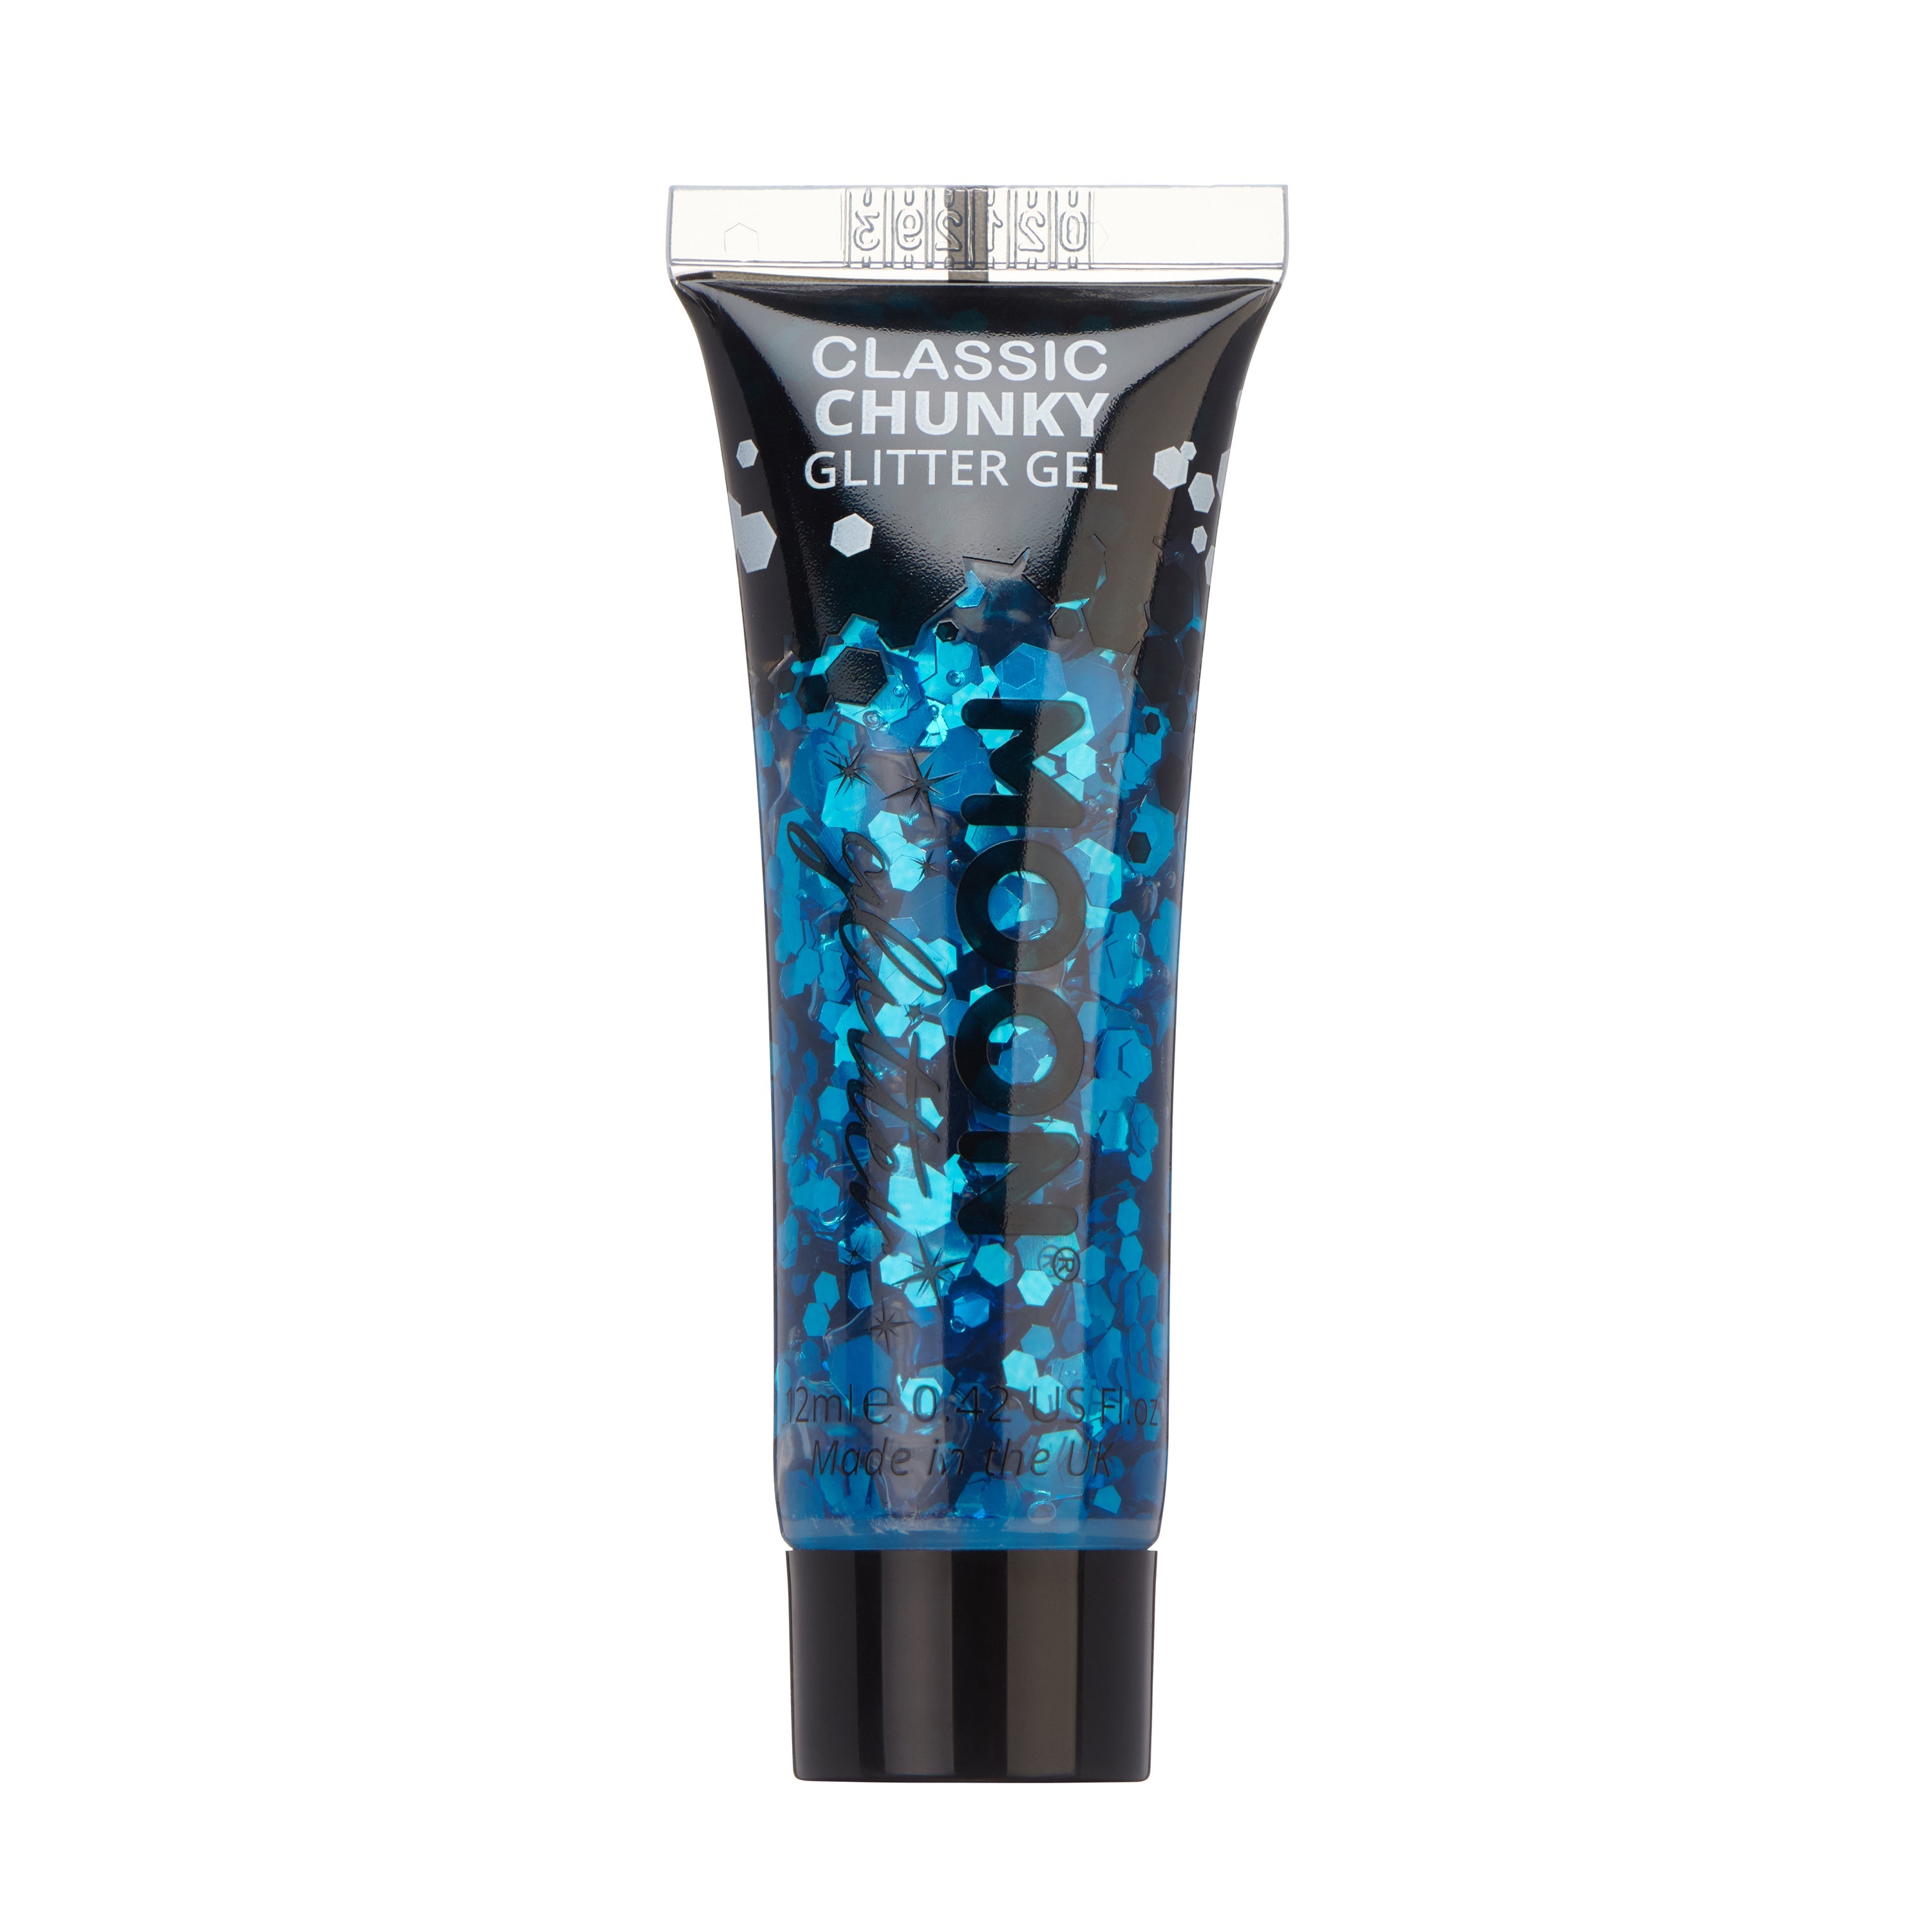 Blue - Classic Chunky Face & Body Glitter Gel, 12mL. Cosmetically certified, FDA & Health Canada compliant, cruelty free and vegan.